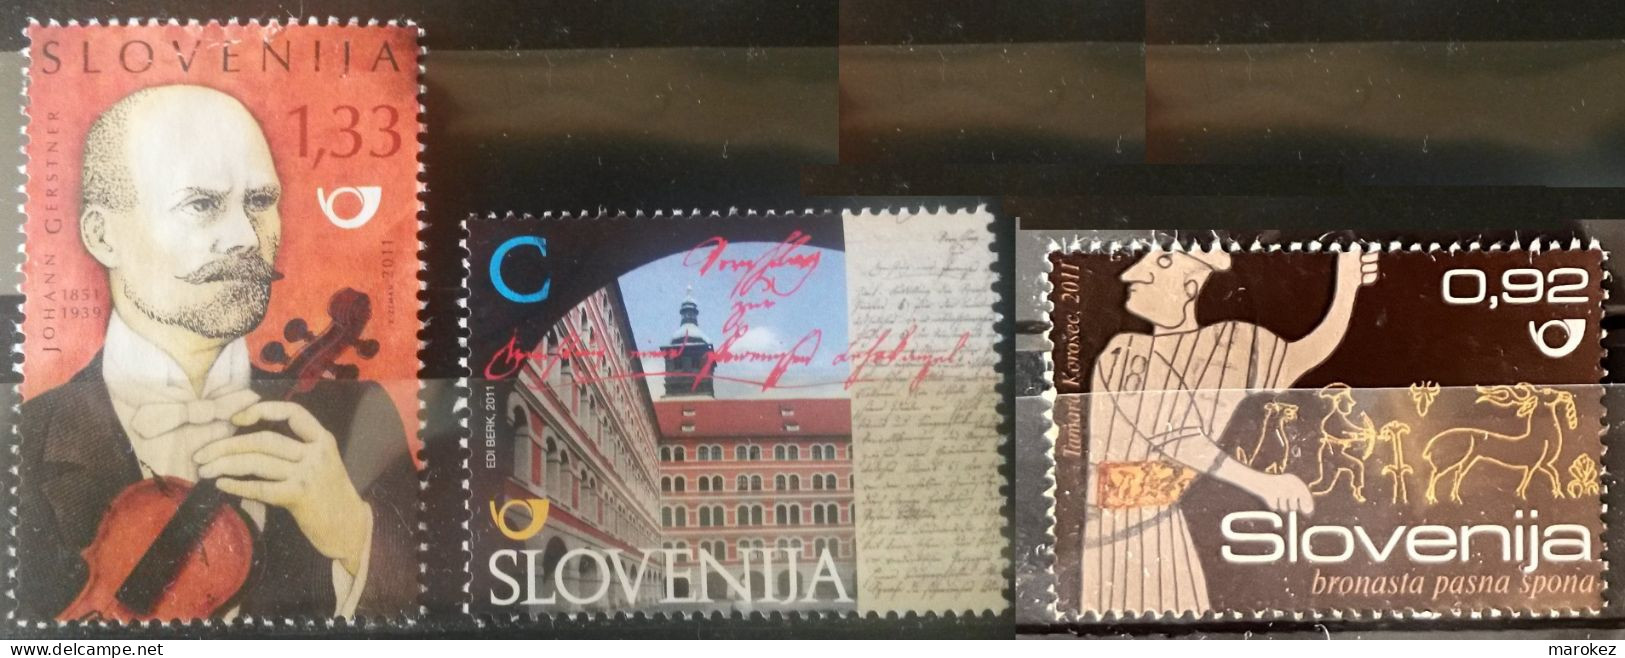 SLOVENIA 2011 Music, History & Archaeology 3 Postally Used Stamps MICHEL # 902,912,925 - Slovenia